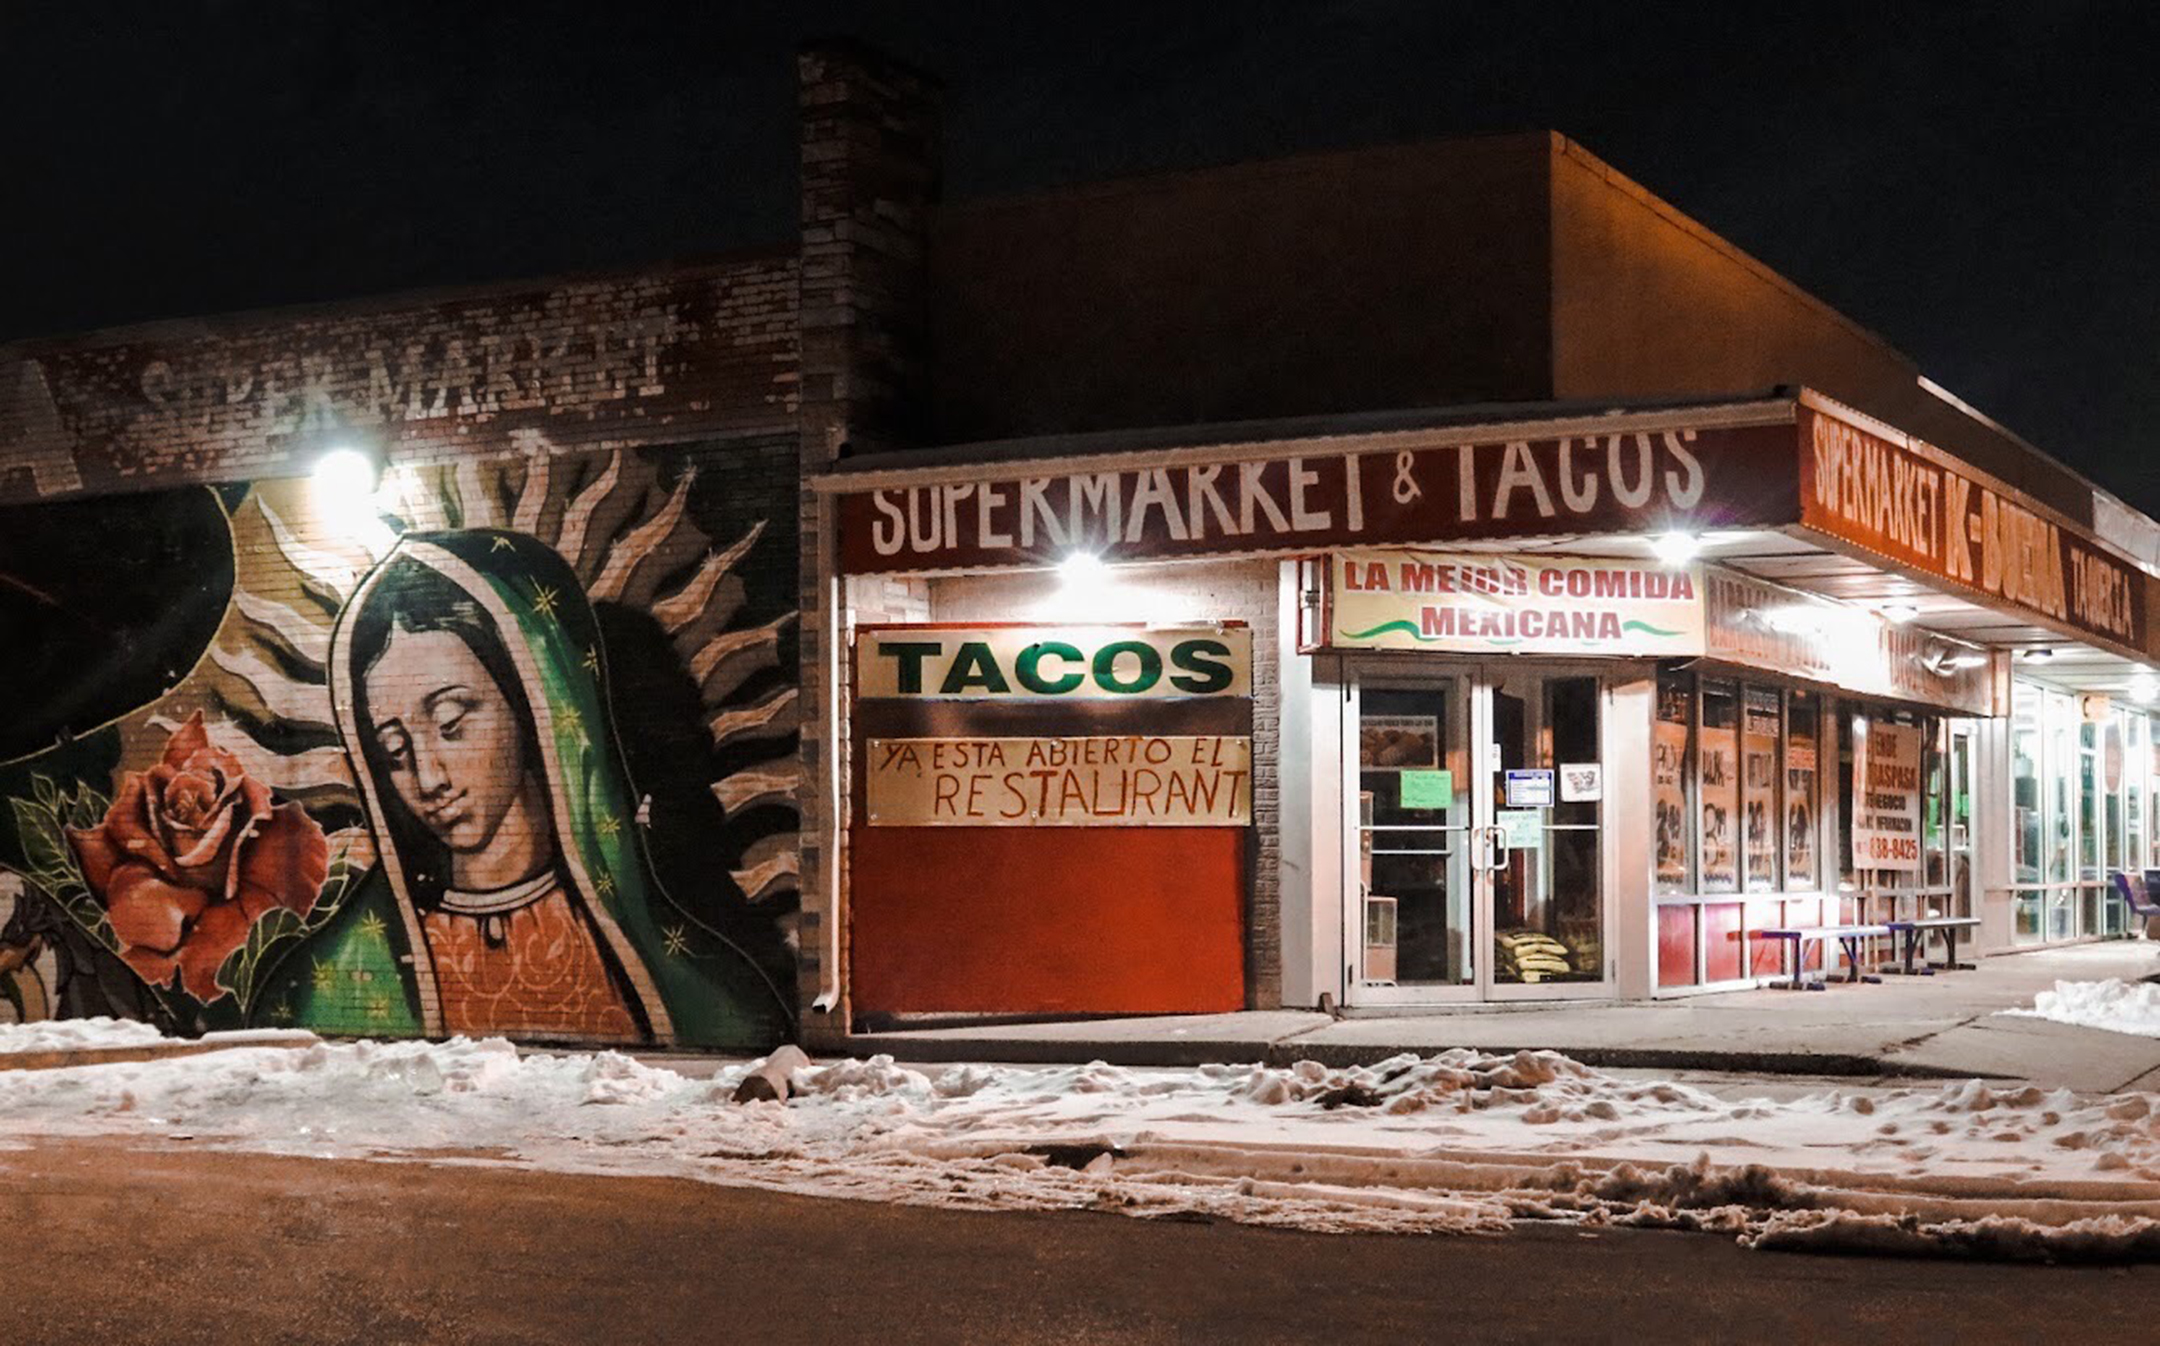 Nighttime photo of a supermarket and taco stand store front with a mural of the Virgin Mary on the left